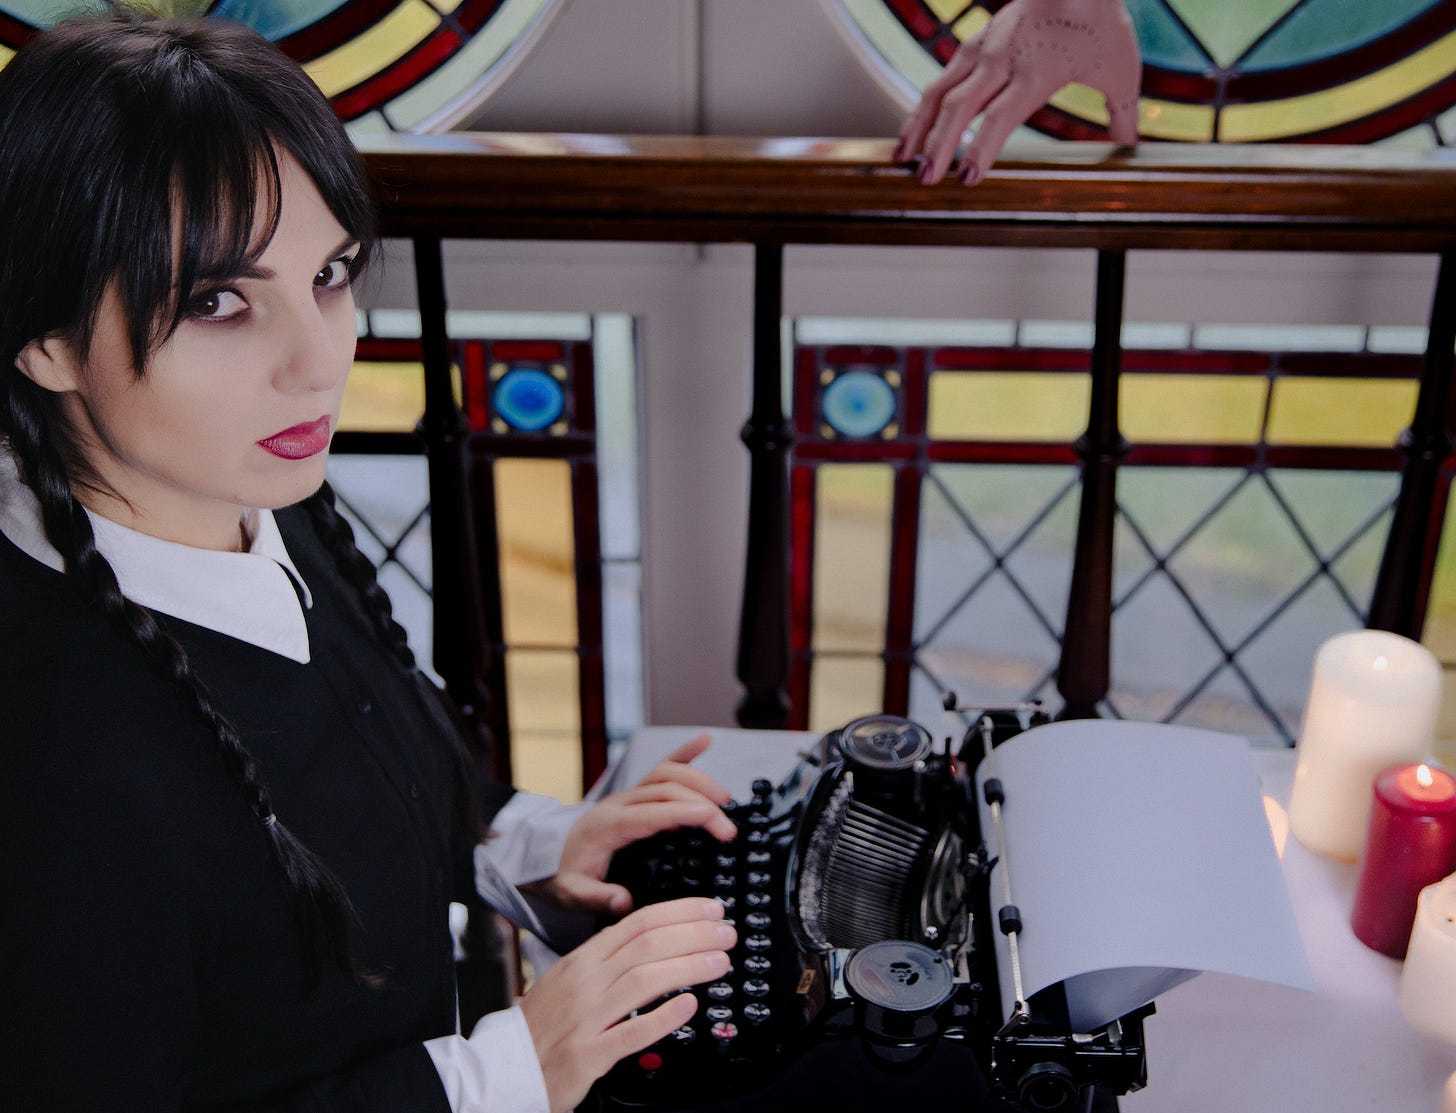 photo entitled "Girl in the Wednesday Addams Costume Writing on a Typewriter." a goth-looking young woman looks at the camera while her hands are positioned on the keys of a typewriter. the photo appears to be taken in a church, as there are stained glass windows behind her. candles are lit on the table upon which the typewriter sits. a disembodied hand sits on a bannister in the background.